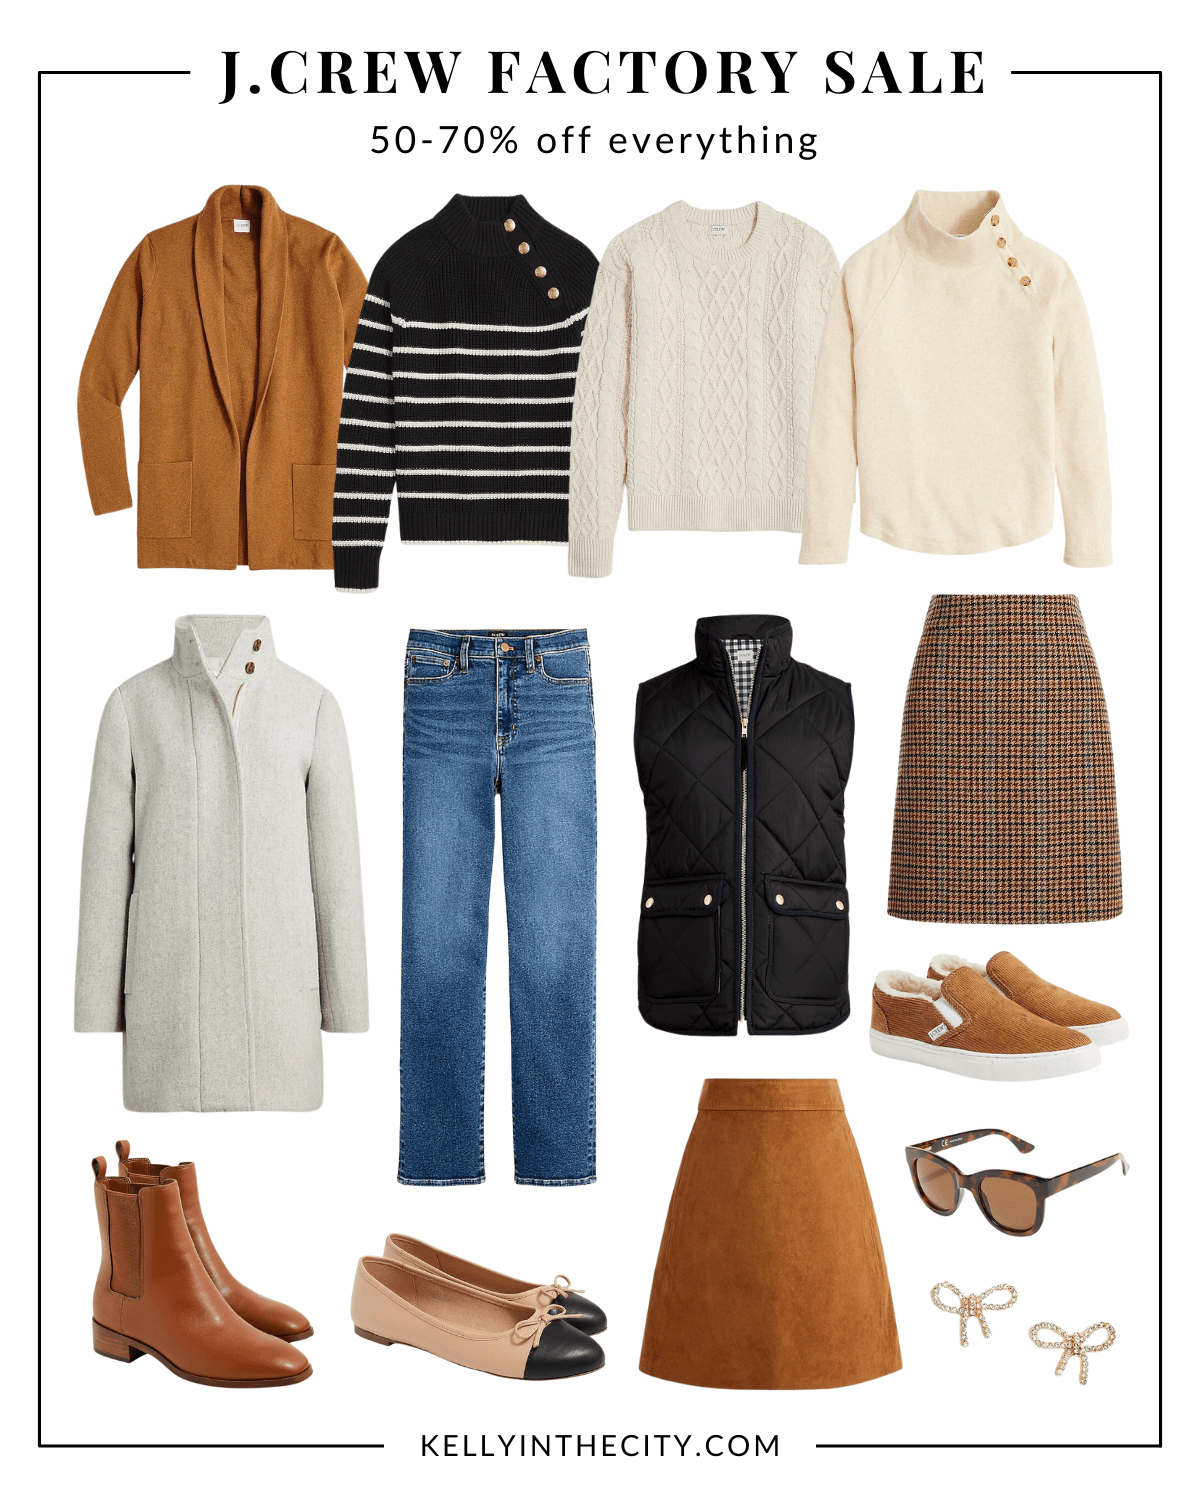 My J.Crew Factory Labor Day Sale favorite picks. From sweater blazers and sweaters to coats and vests to skirts and shoes.